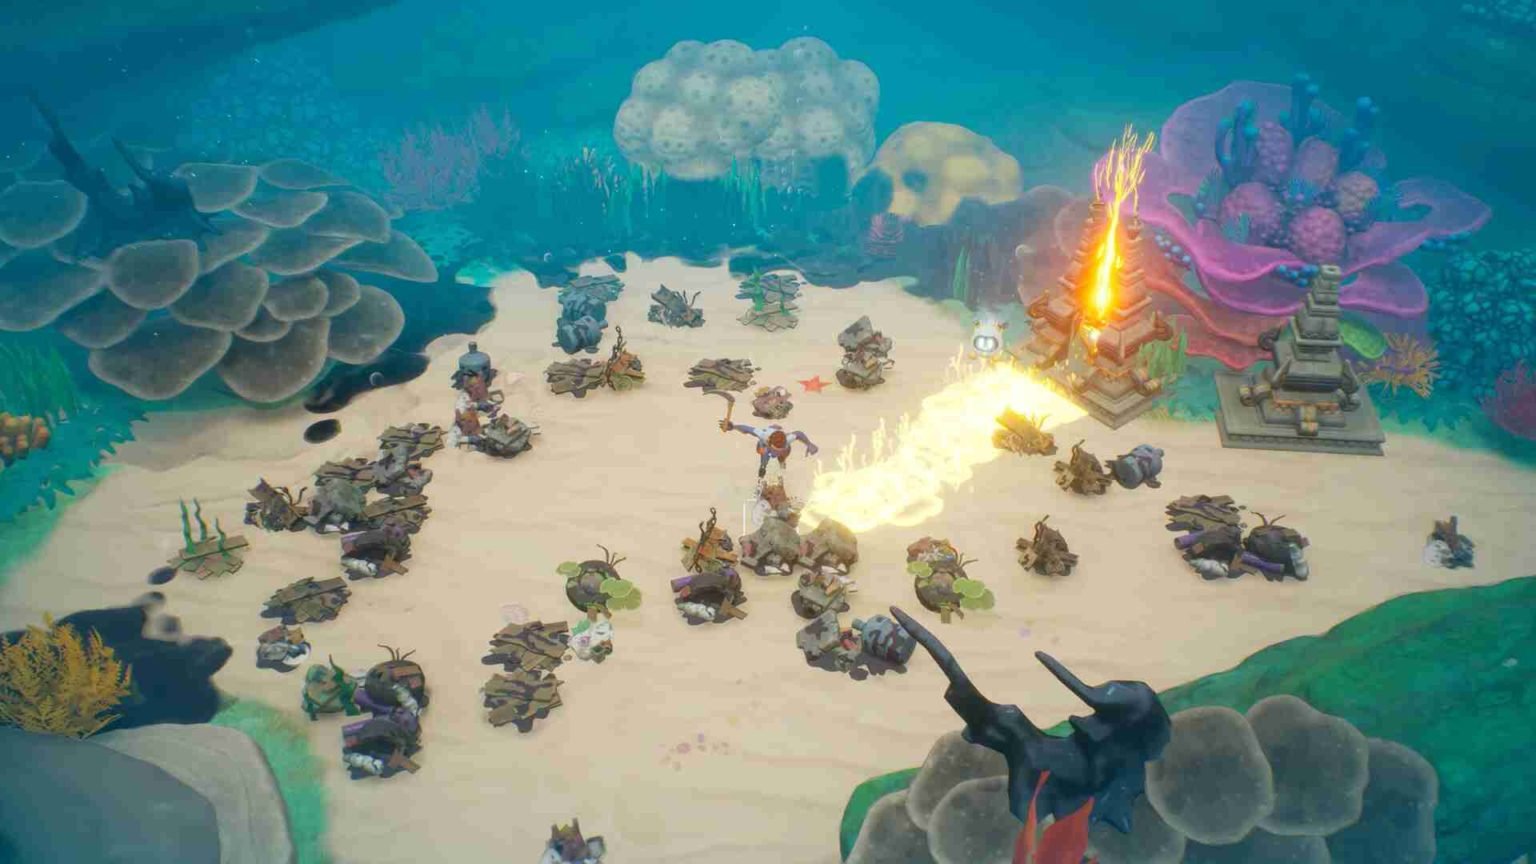 Coral Island Multiplayer Mode Release Date When is it coming out